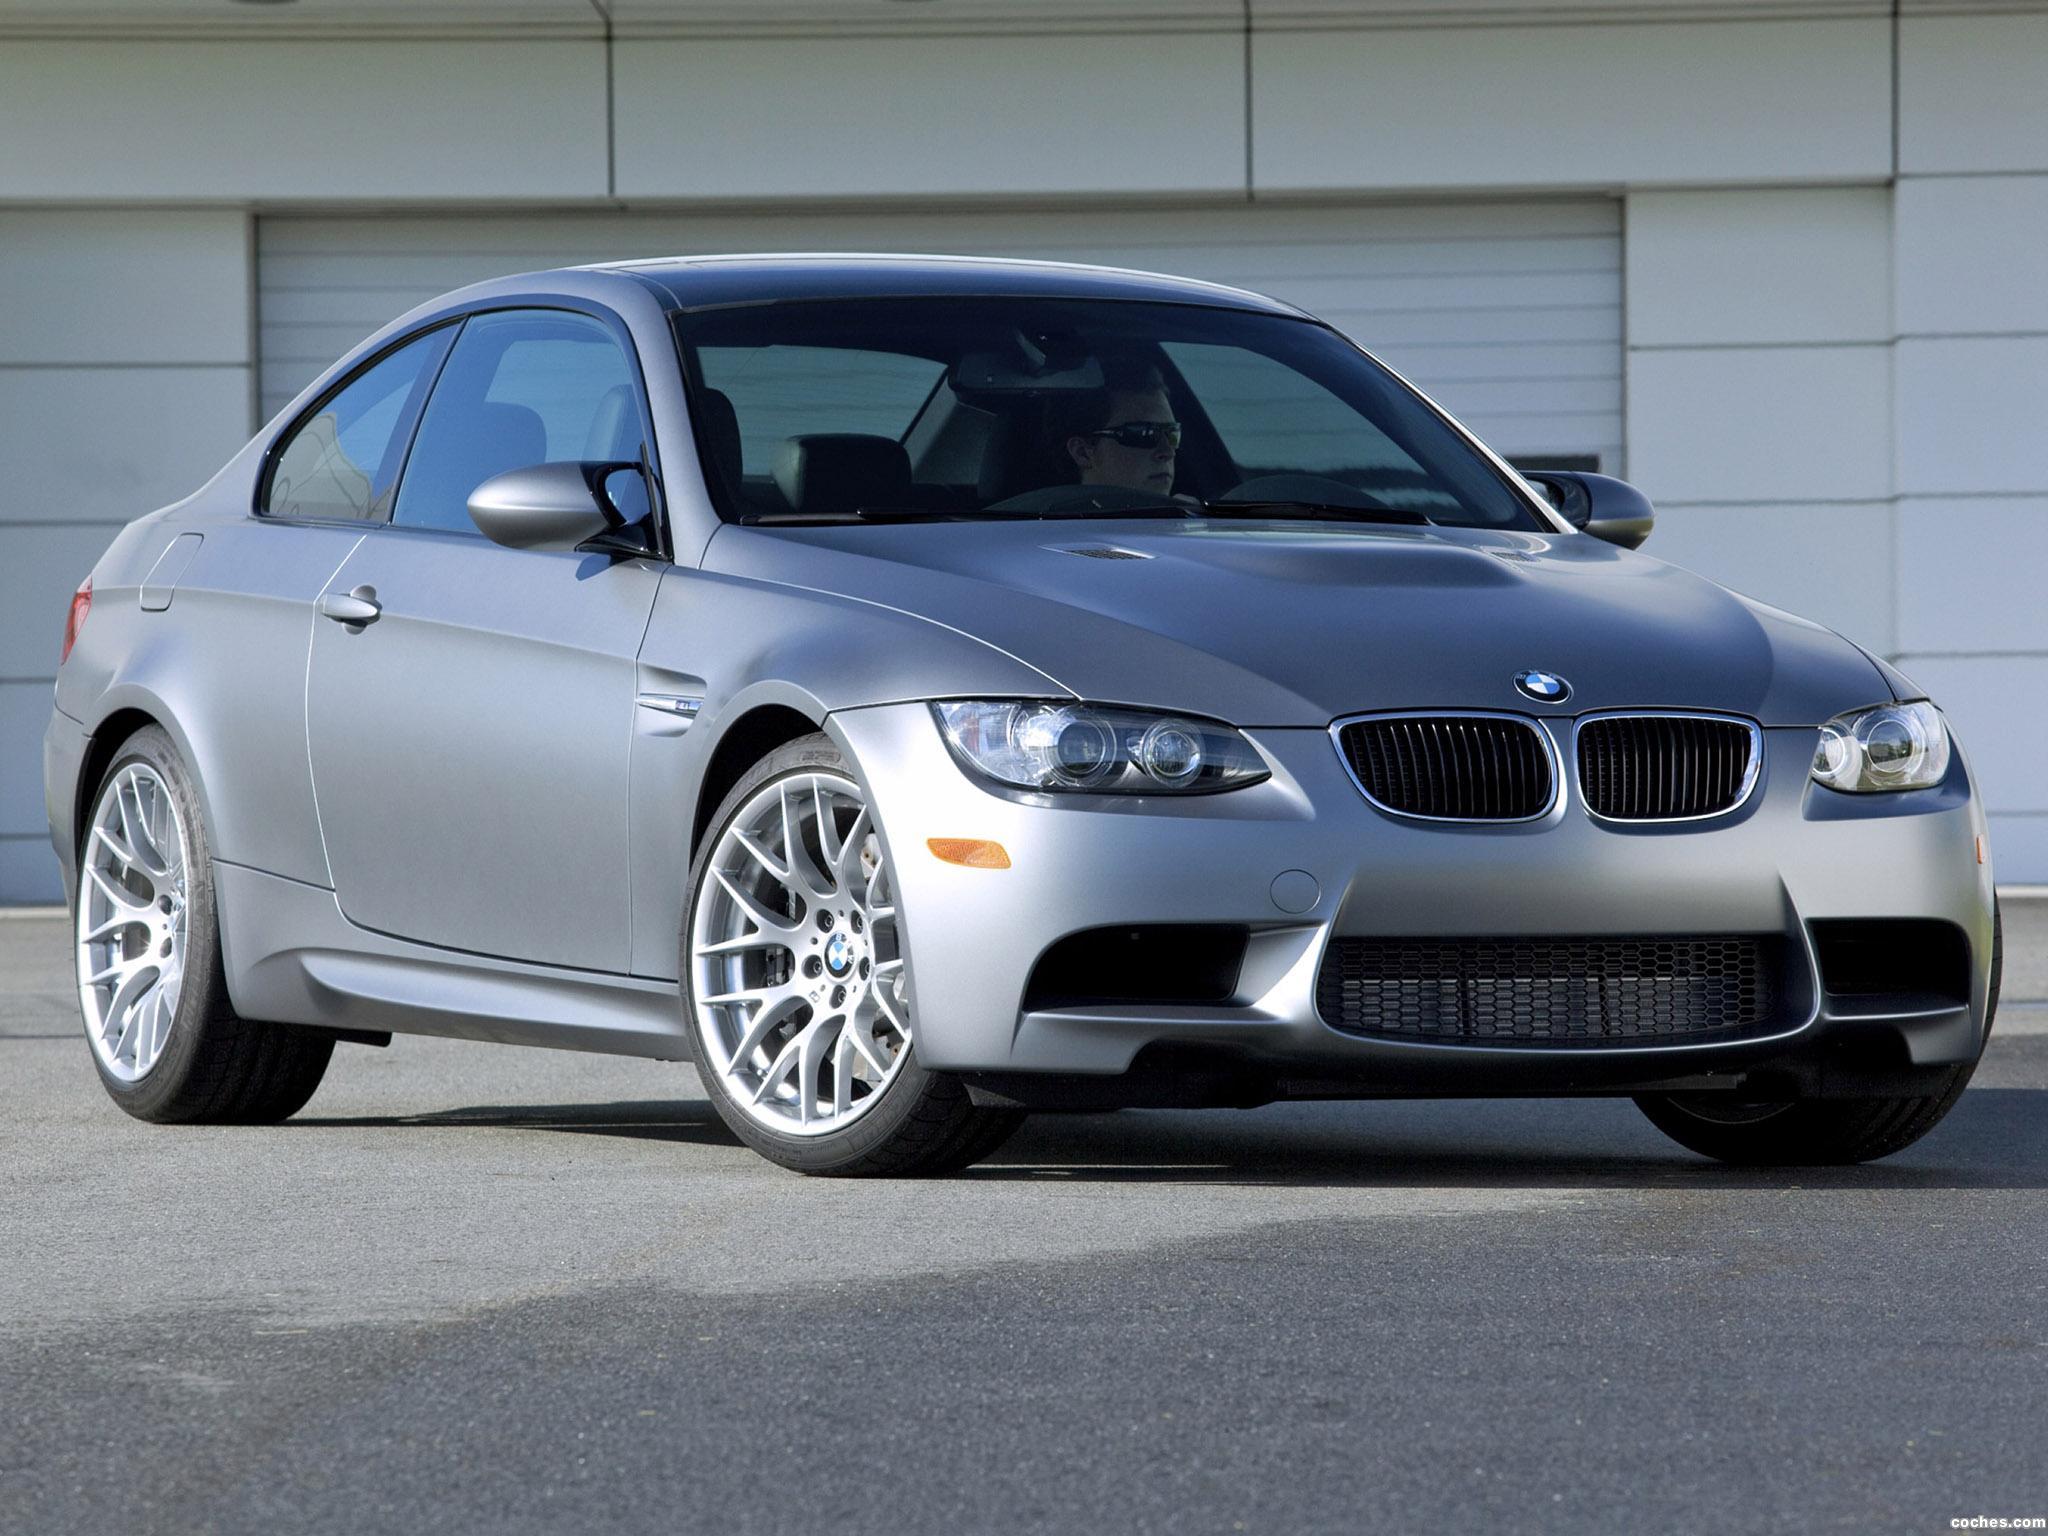 bmw_m3-frozen-gray-coupe-2010_r14.jpg